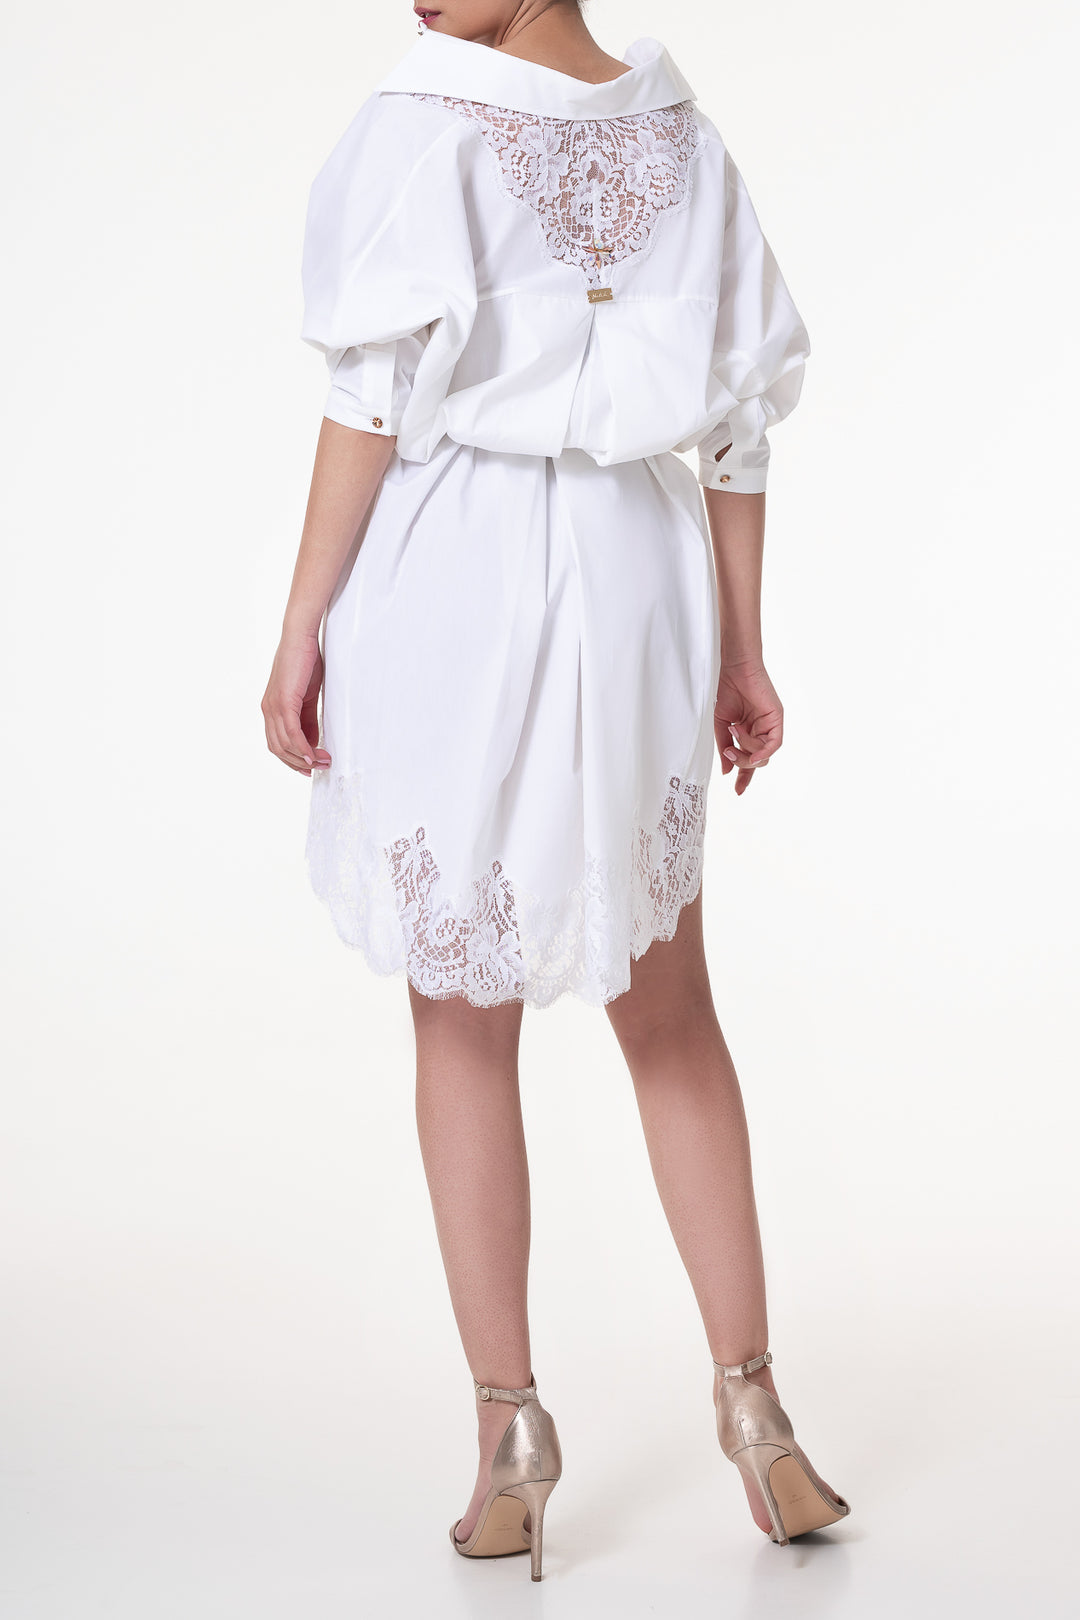 Gioia White Lace Inserts Cotton Shirt Dress With Silver Buttons